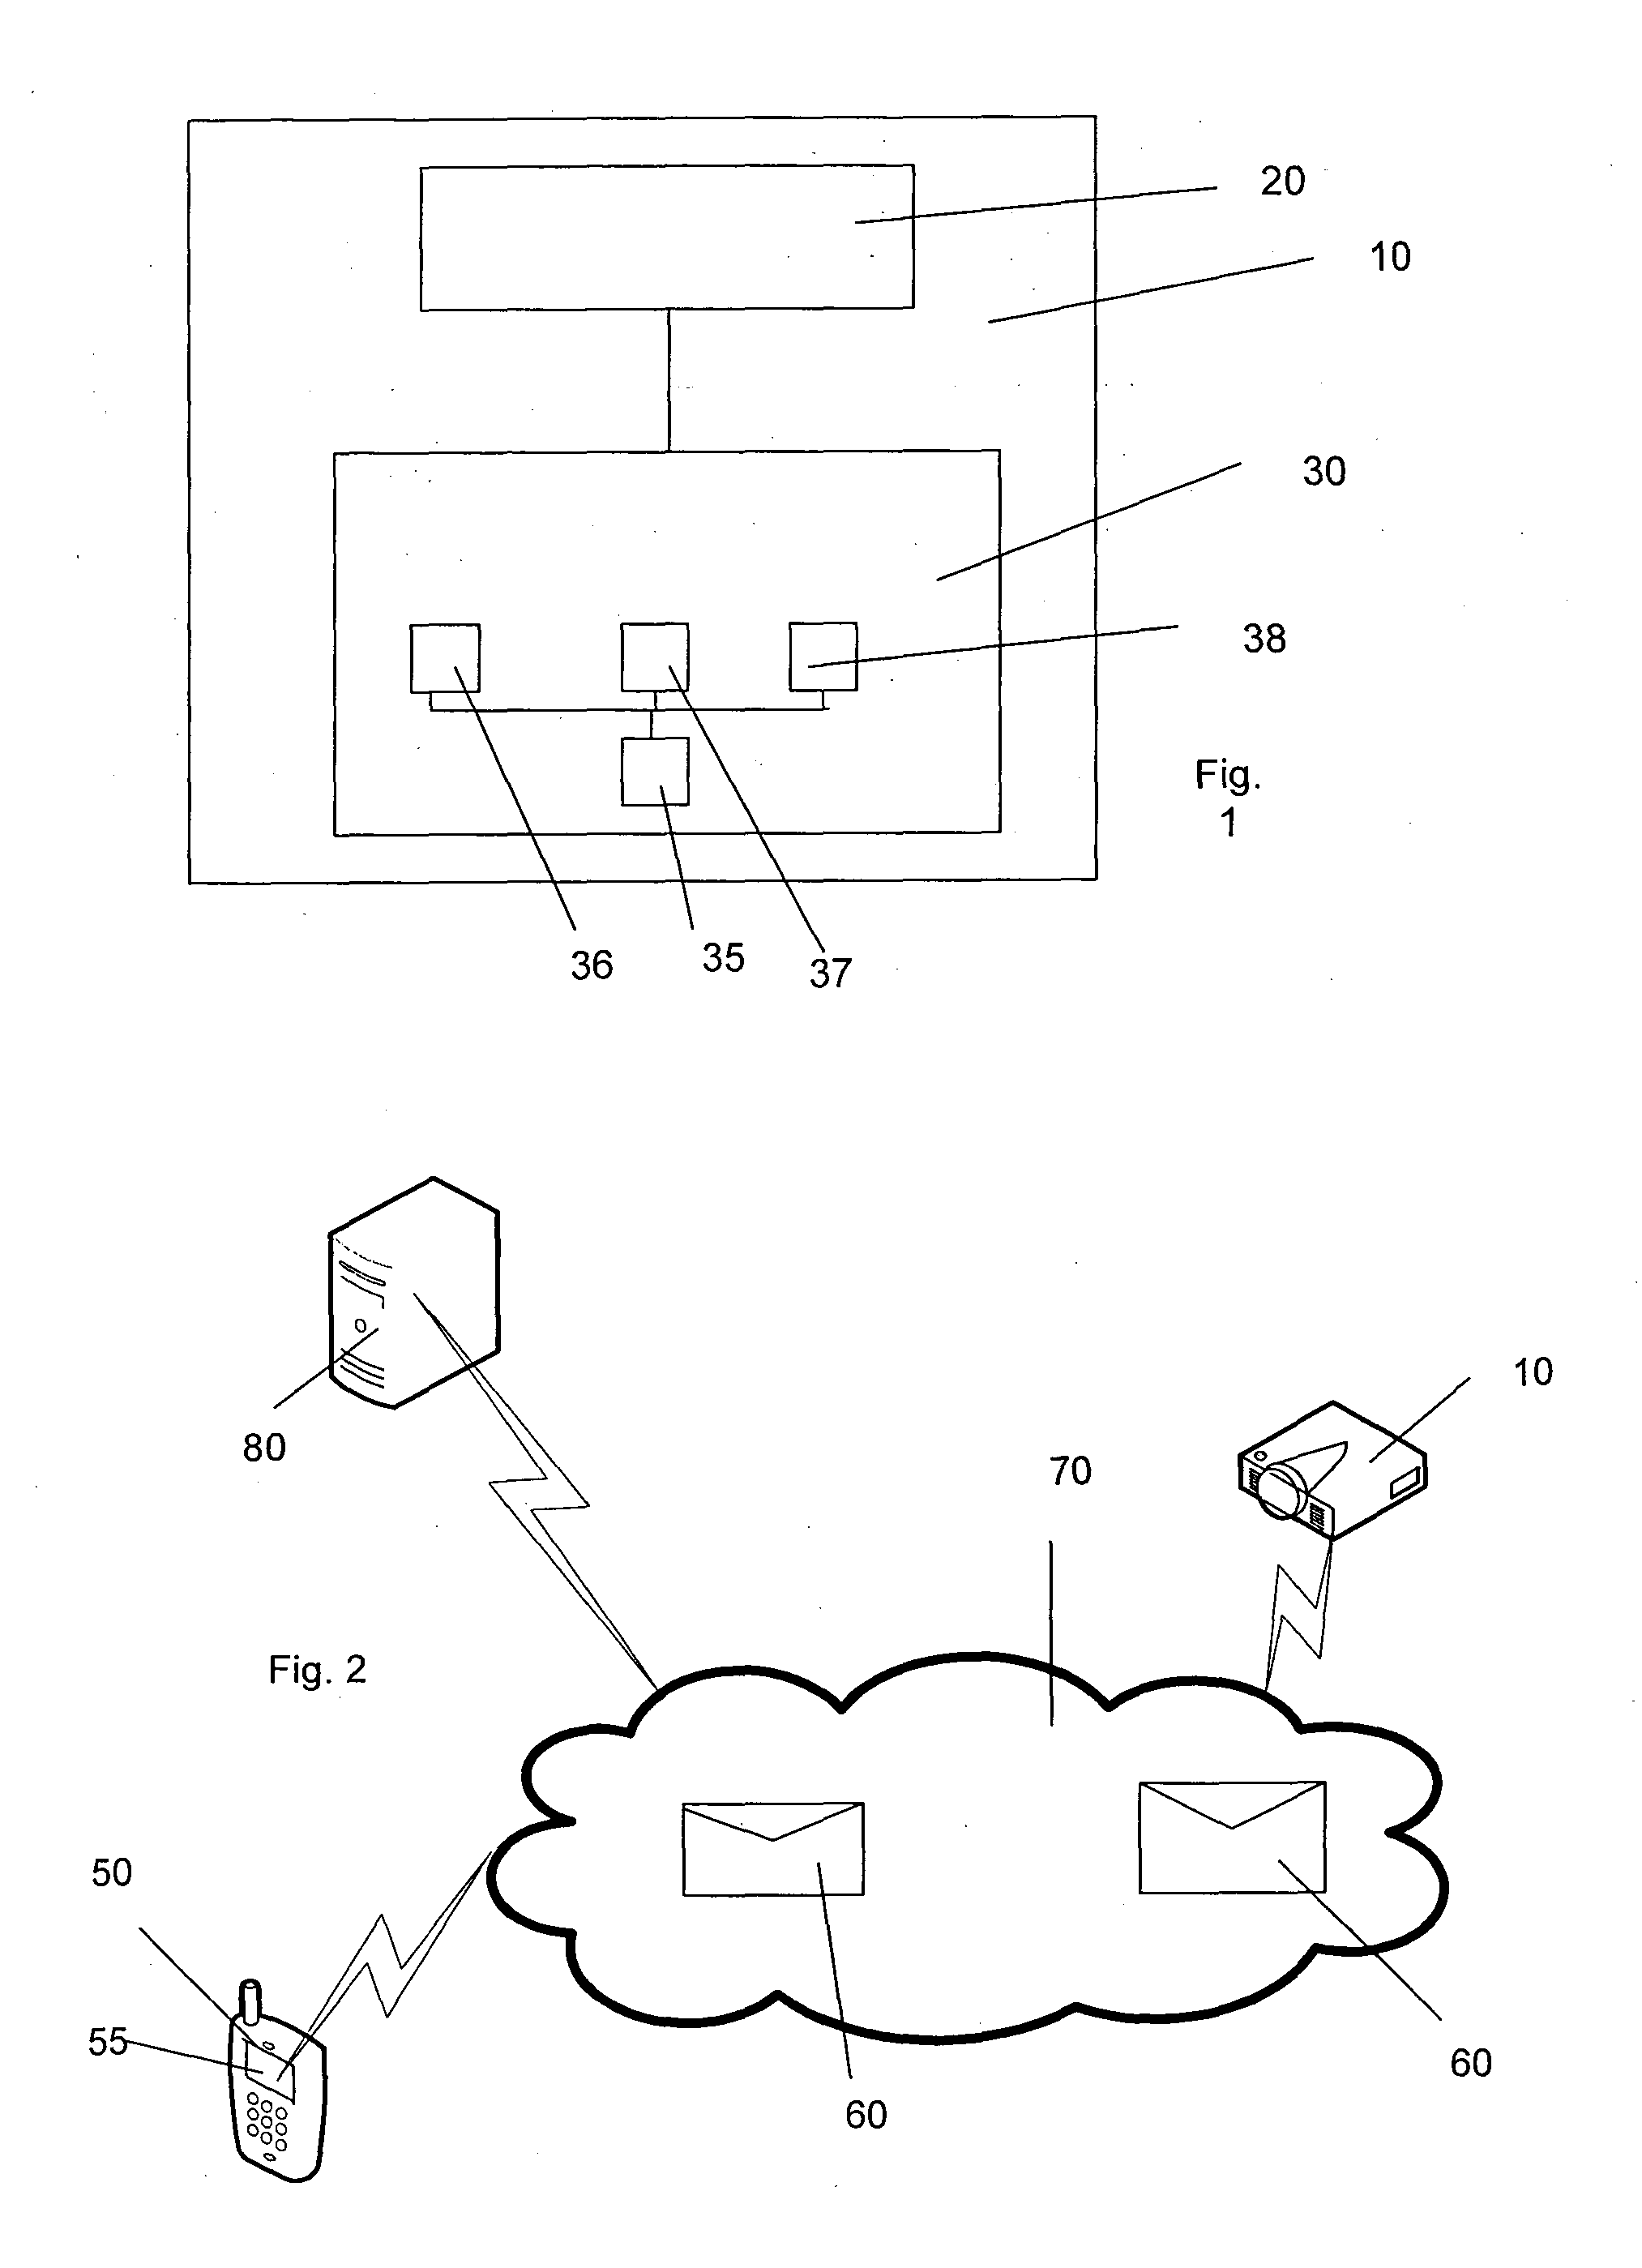 Monitoring device and system